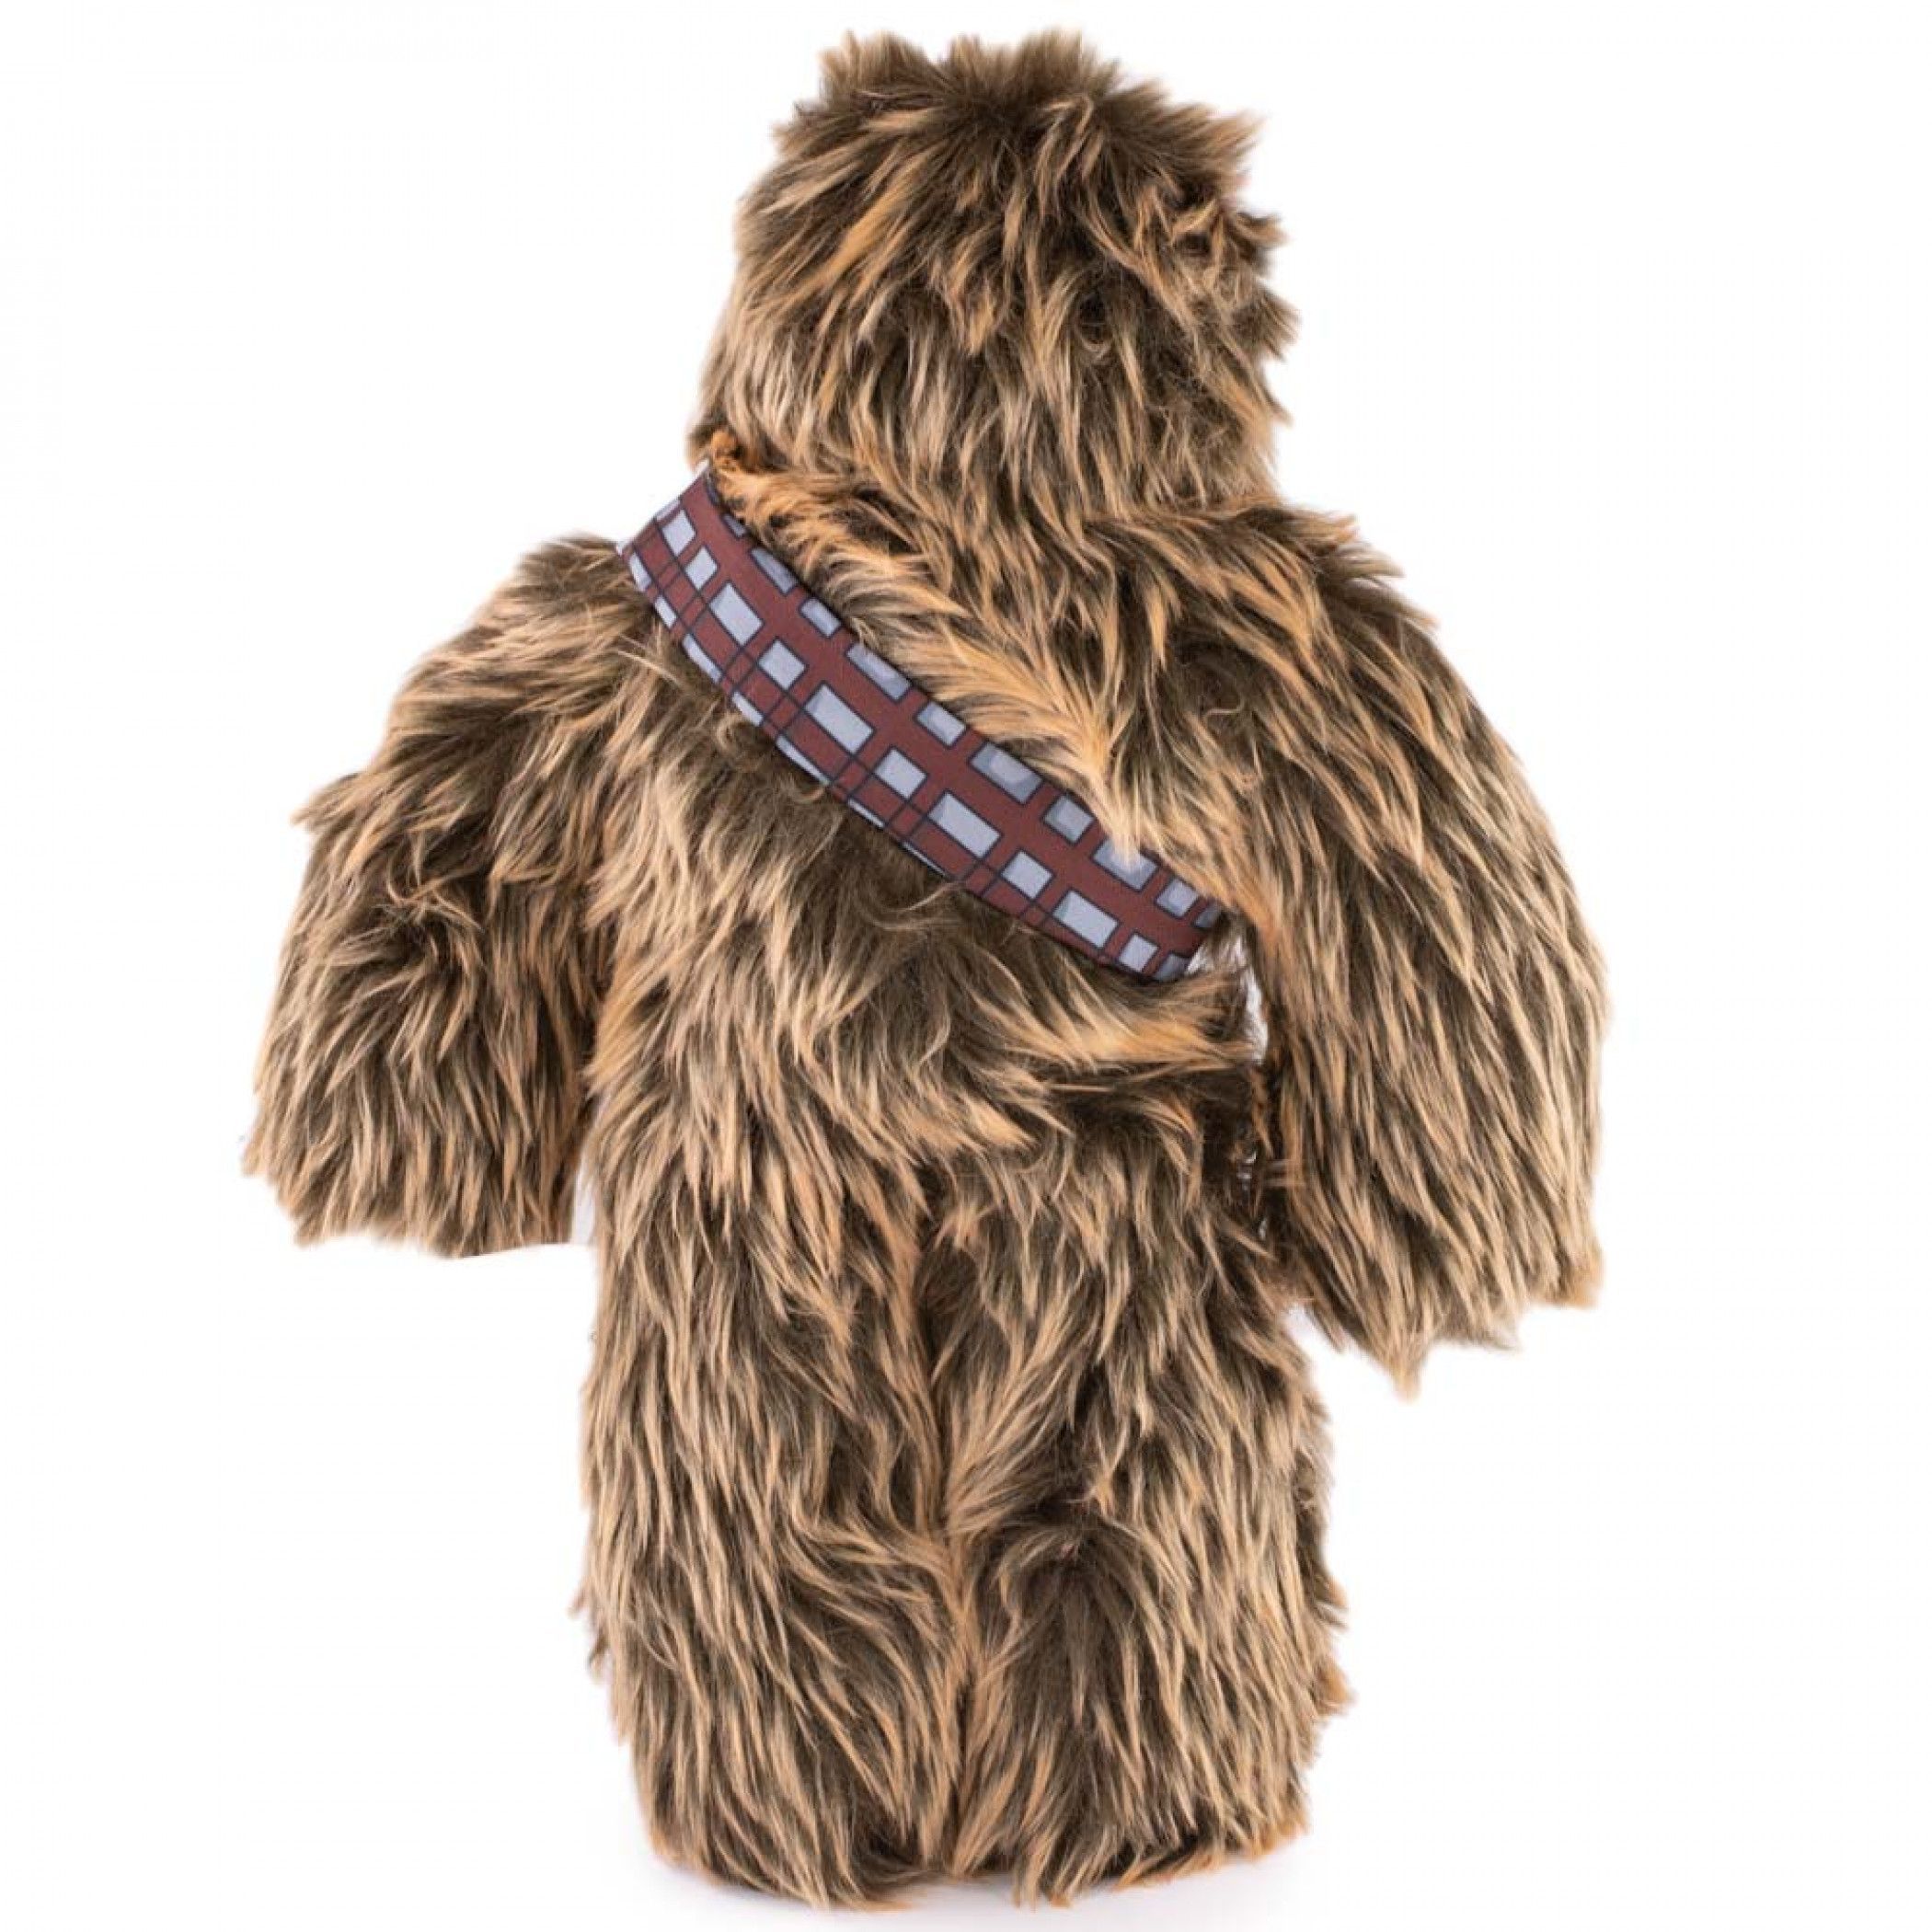 Star Wars Chewbacca Squeaker Plush Large Dog Toy